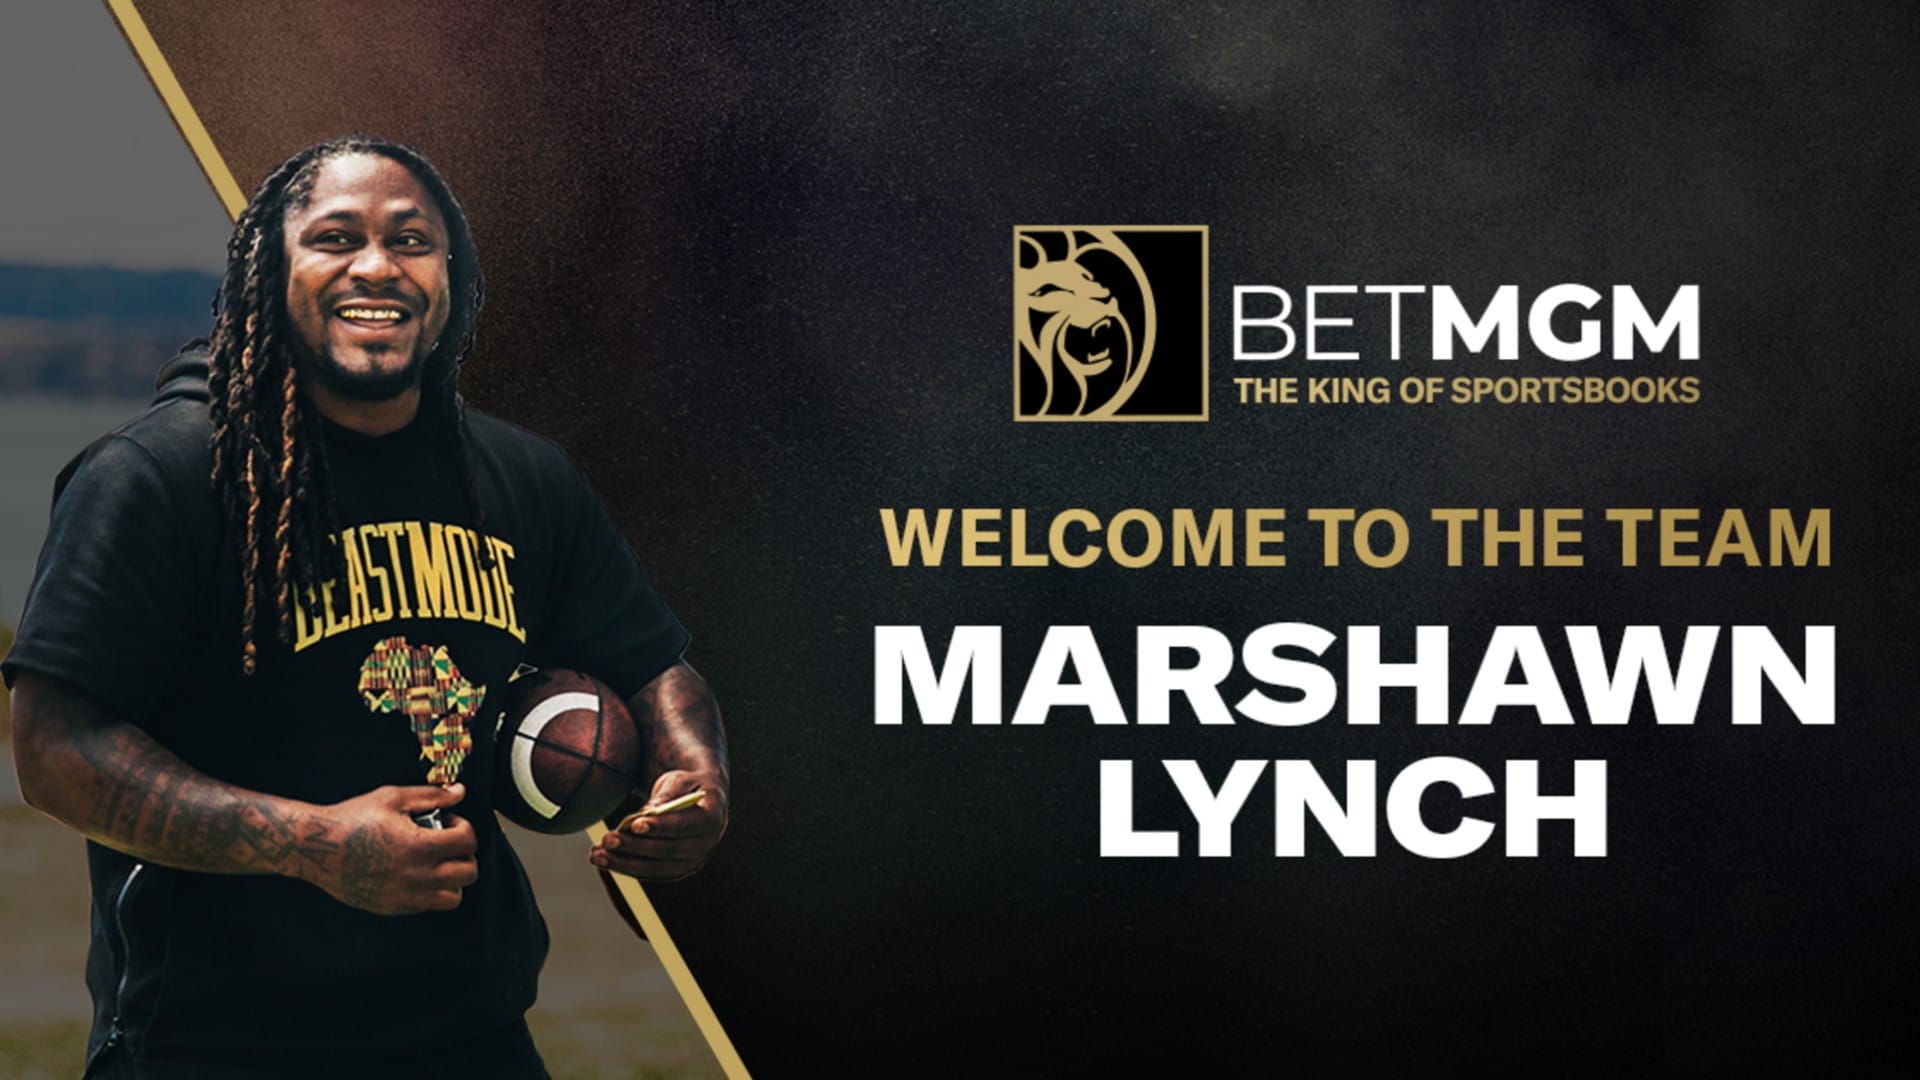 Marshawn Lynch with a "Beast Mode" t-shirt and a football superimposed on a black & gold background next to the BetMGM logo and the words "welcome to the team Marshawn Lunch"